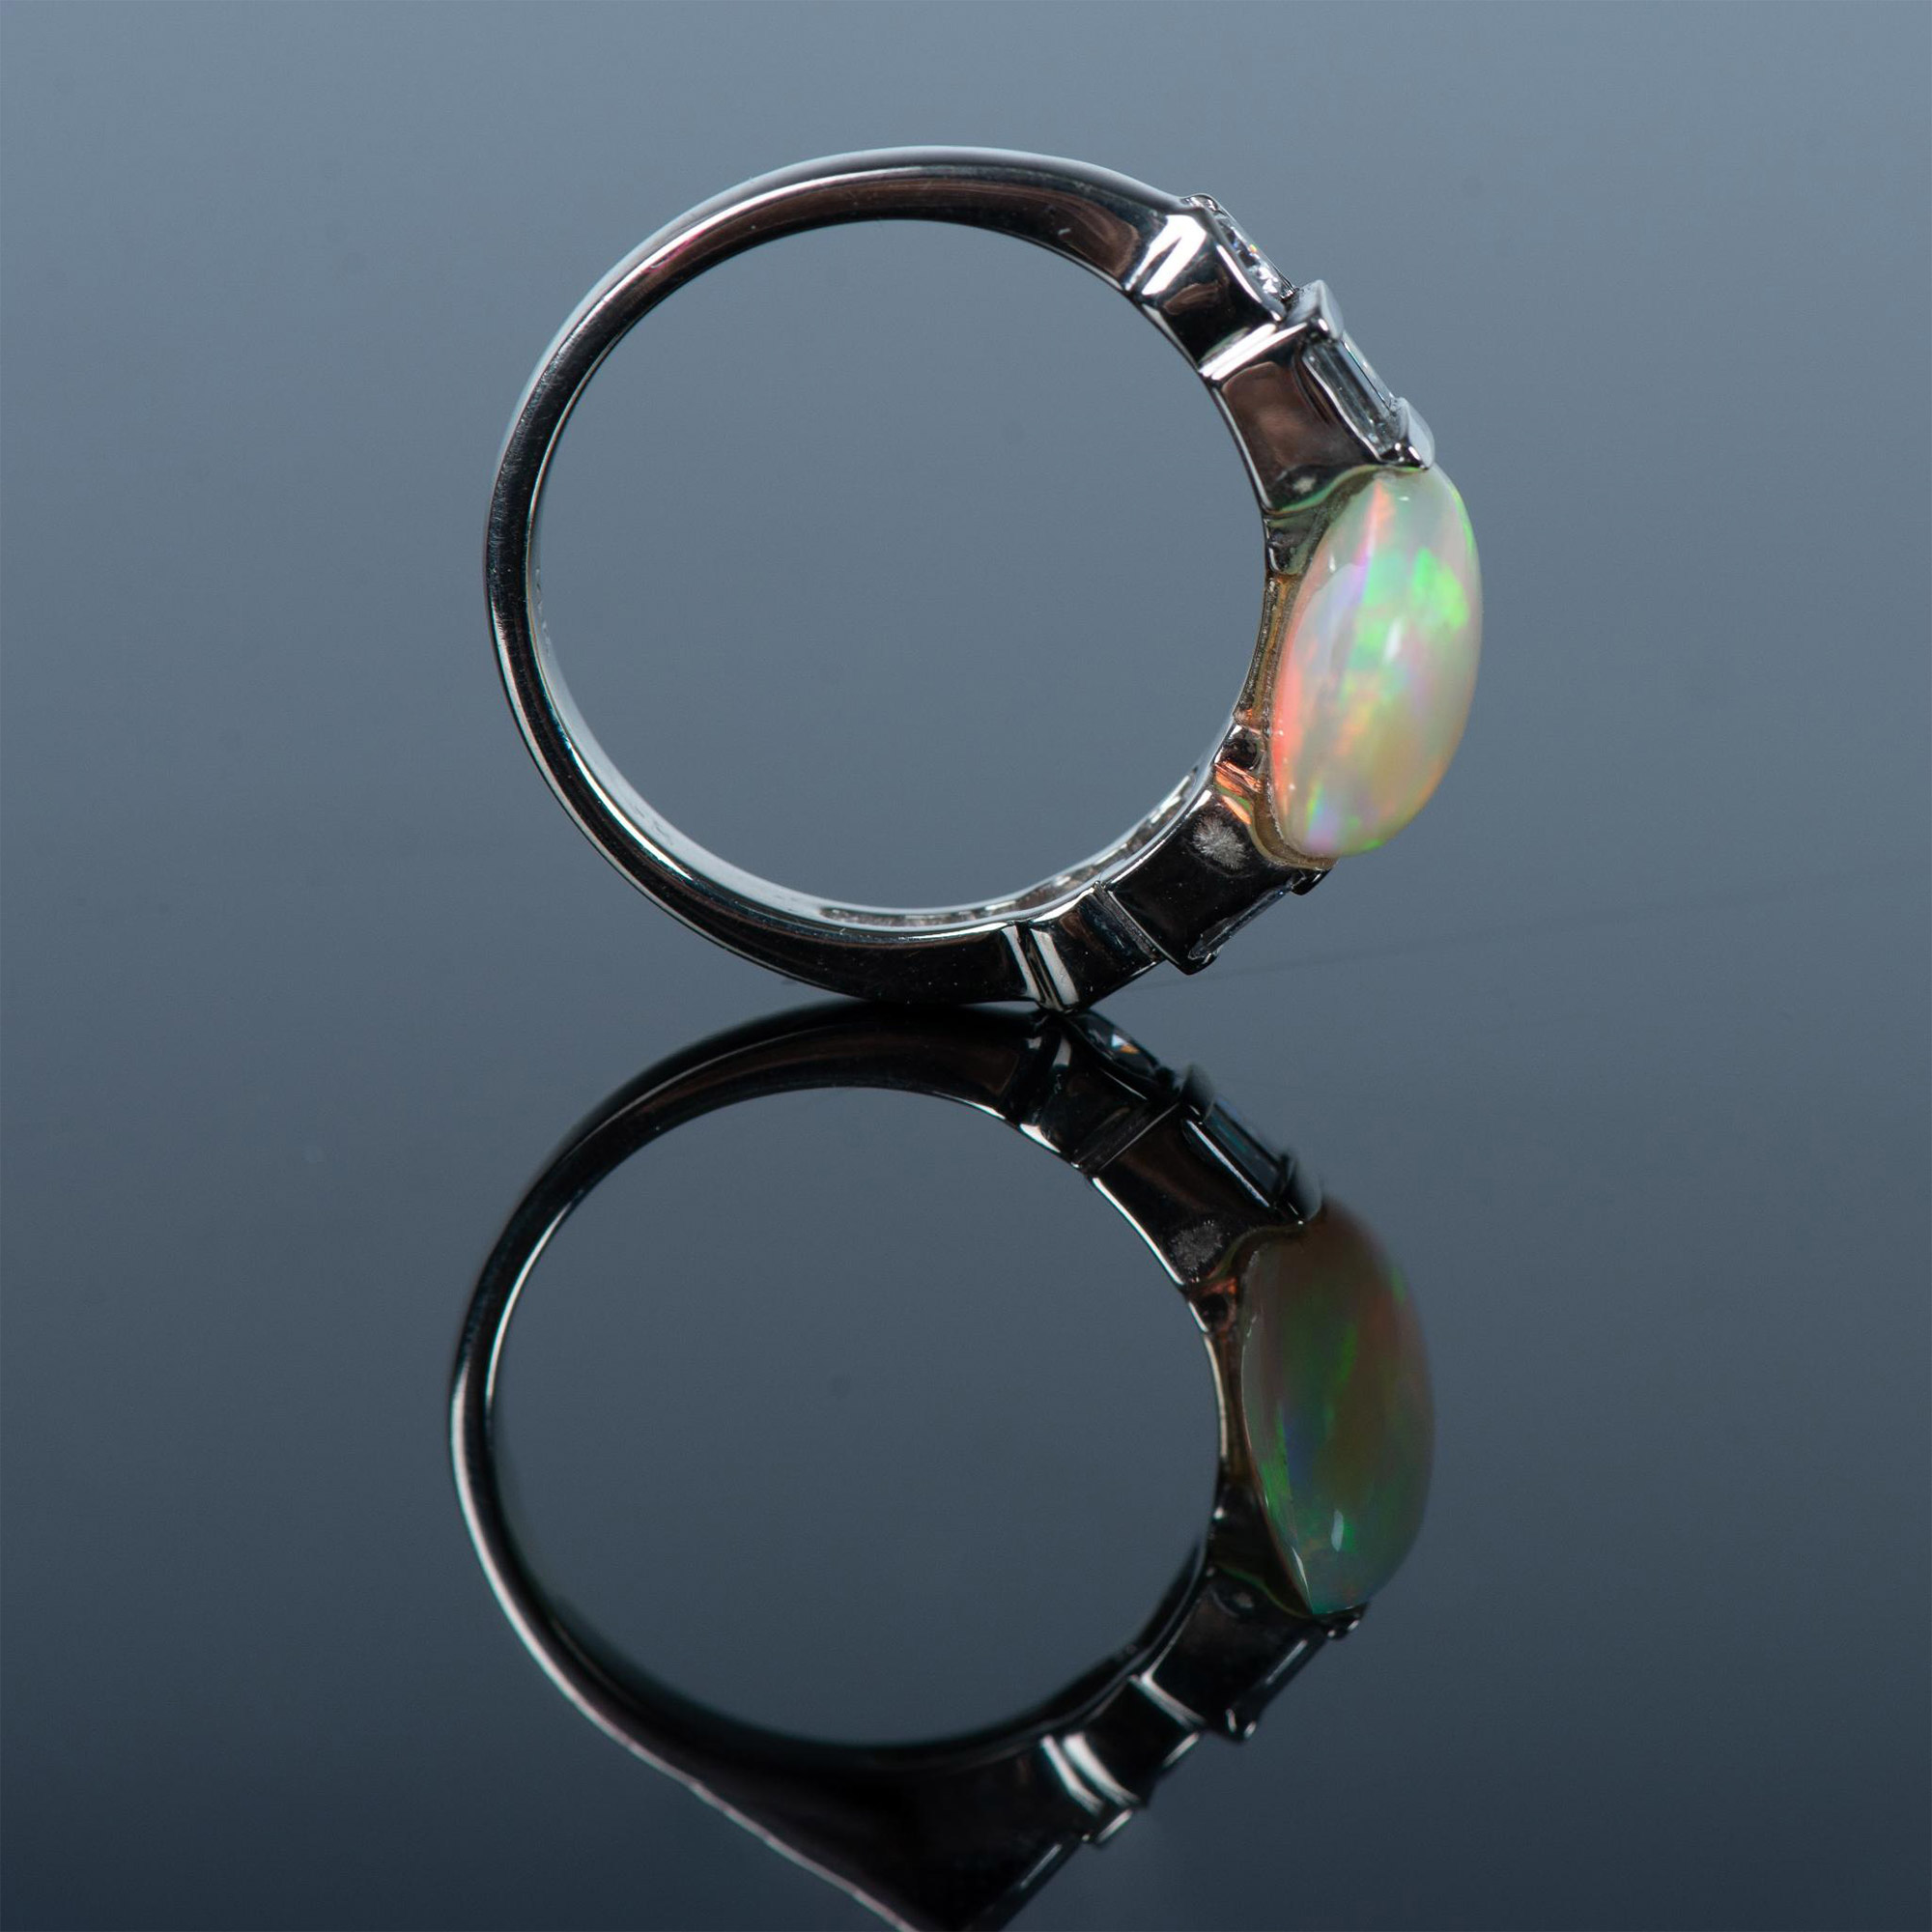 Fabulous 14K White Gold, Diamond, and Opal Ring - Image 5 of 8